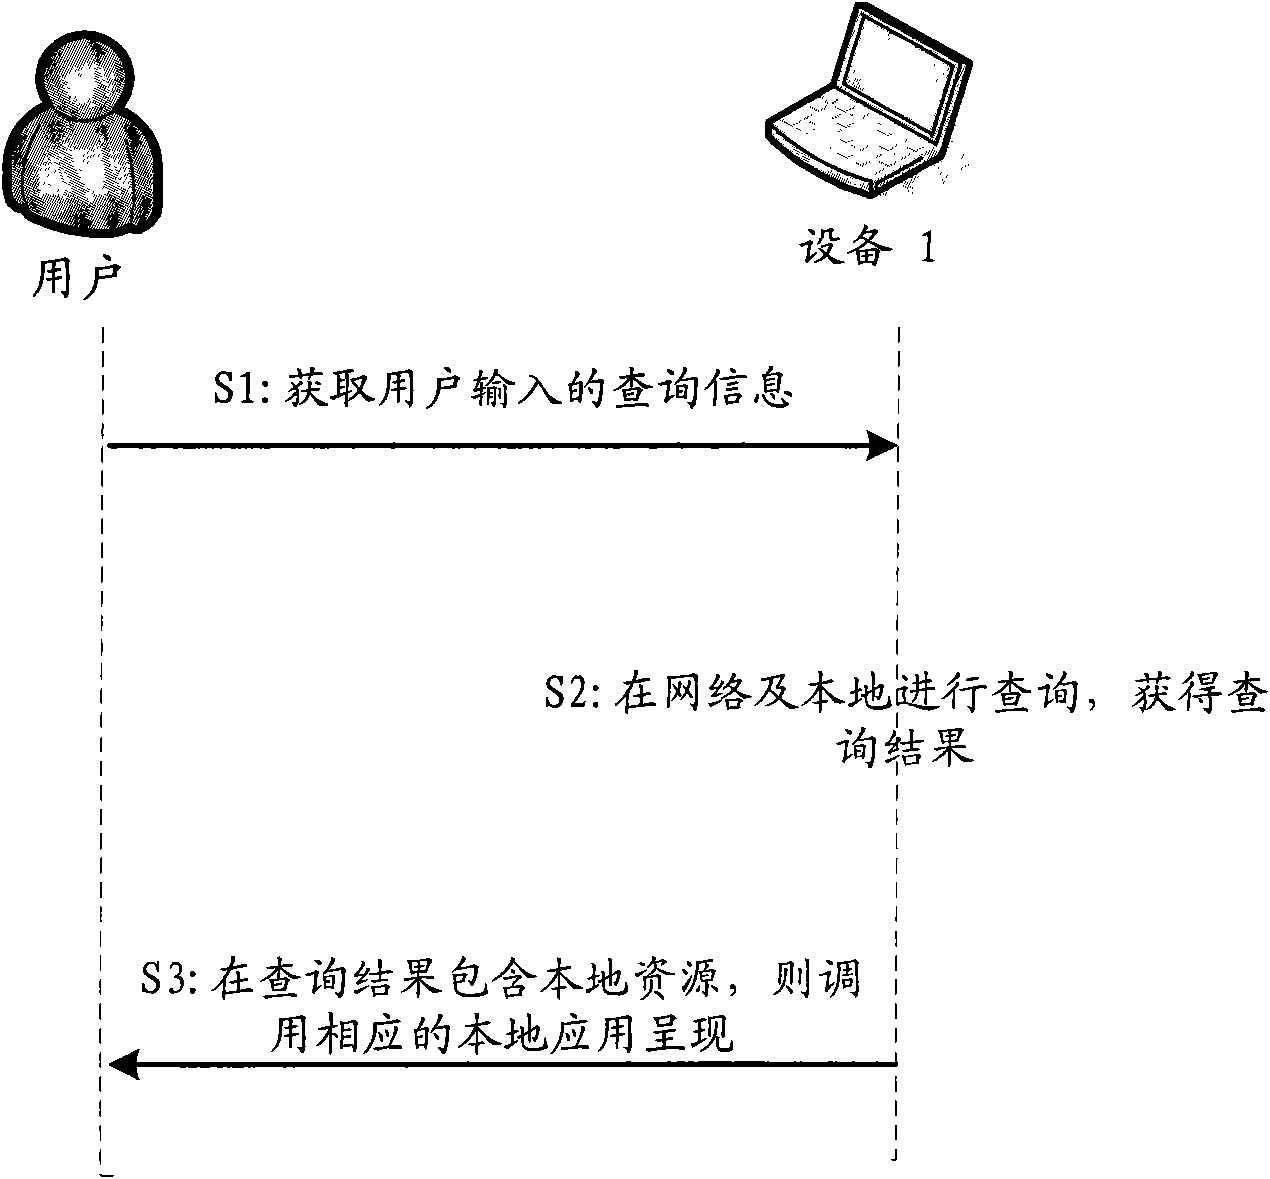 Inquiry based method and device for showing local resource of user equipment